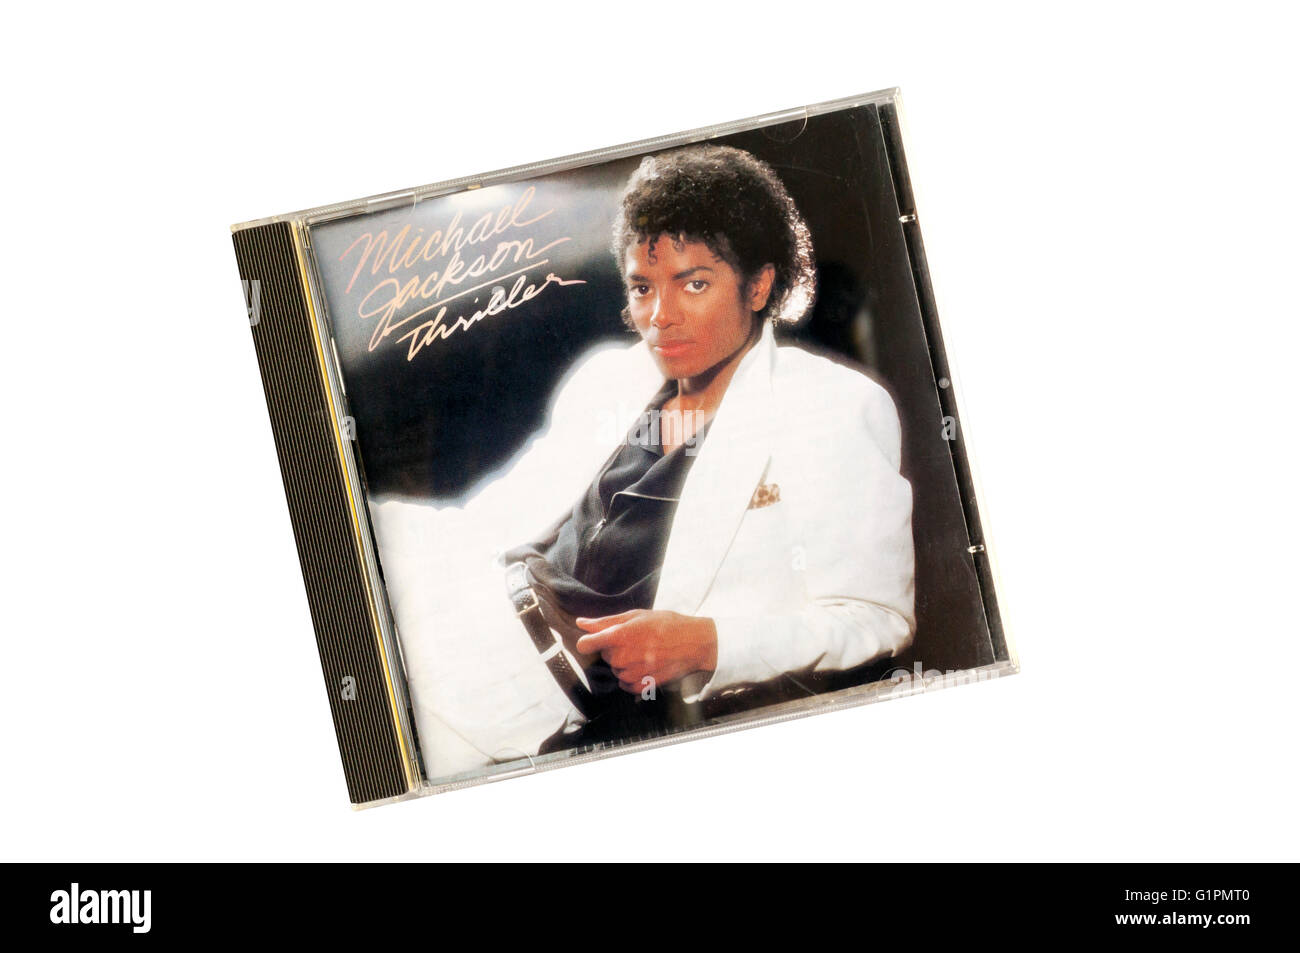 Thriller was the sixth studio album by Michael Jackson, released by Epic Records in 1982. Stock Photo